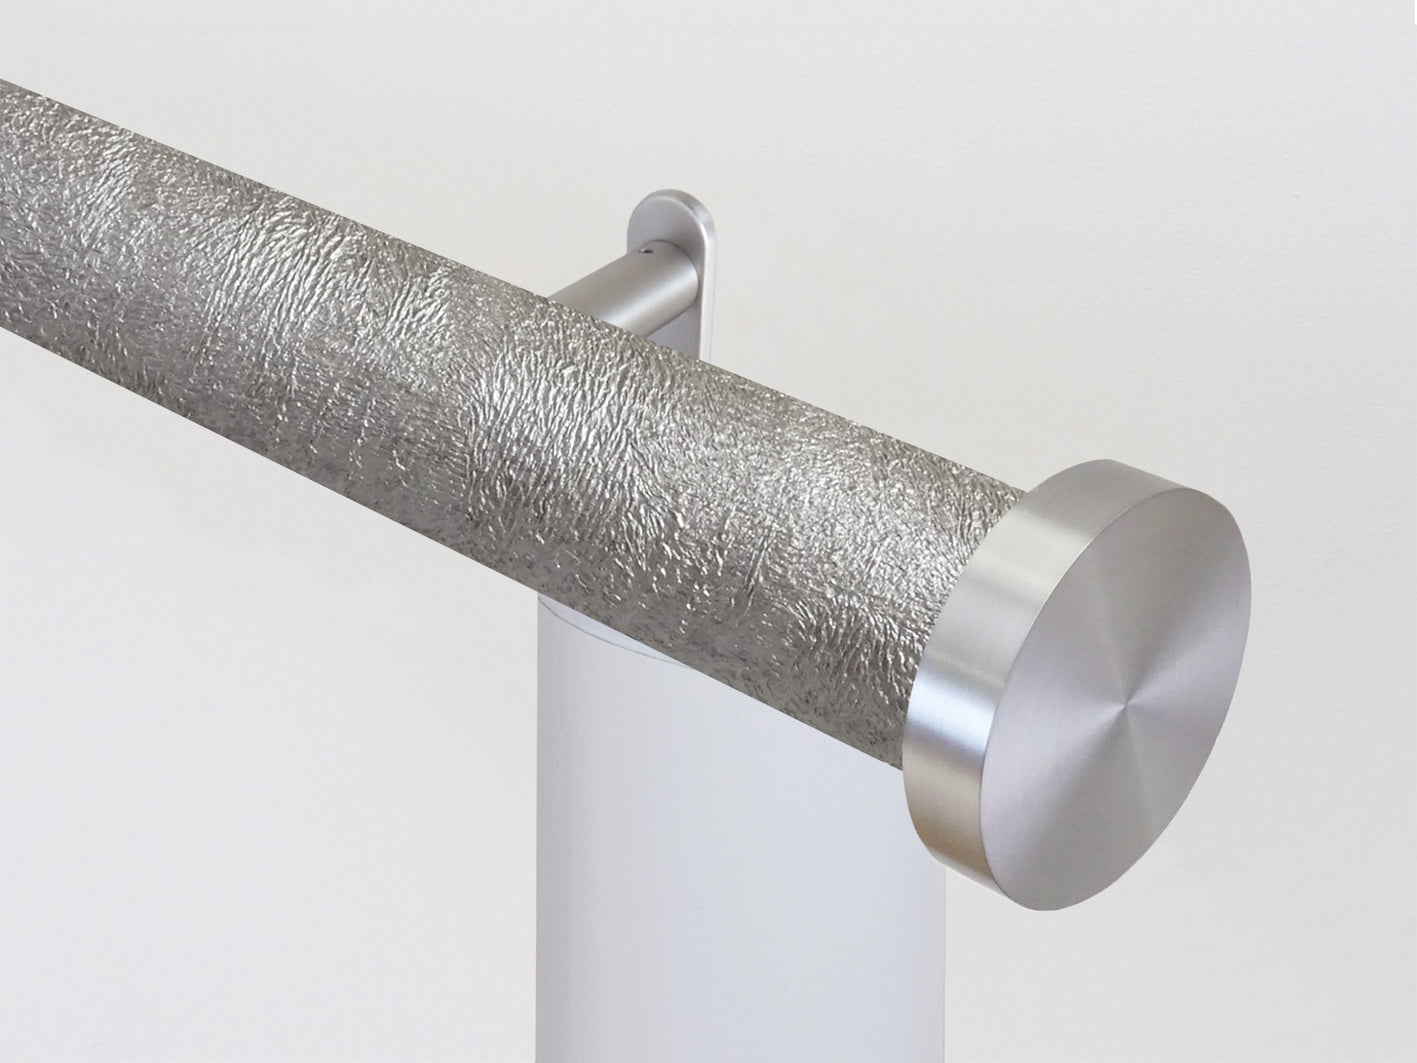 Motorised electric curtain pole, wireless & battery powered using the Somfy Glydea track | Walcot House UK curtain pole specialists